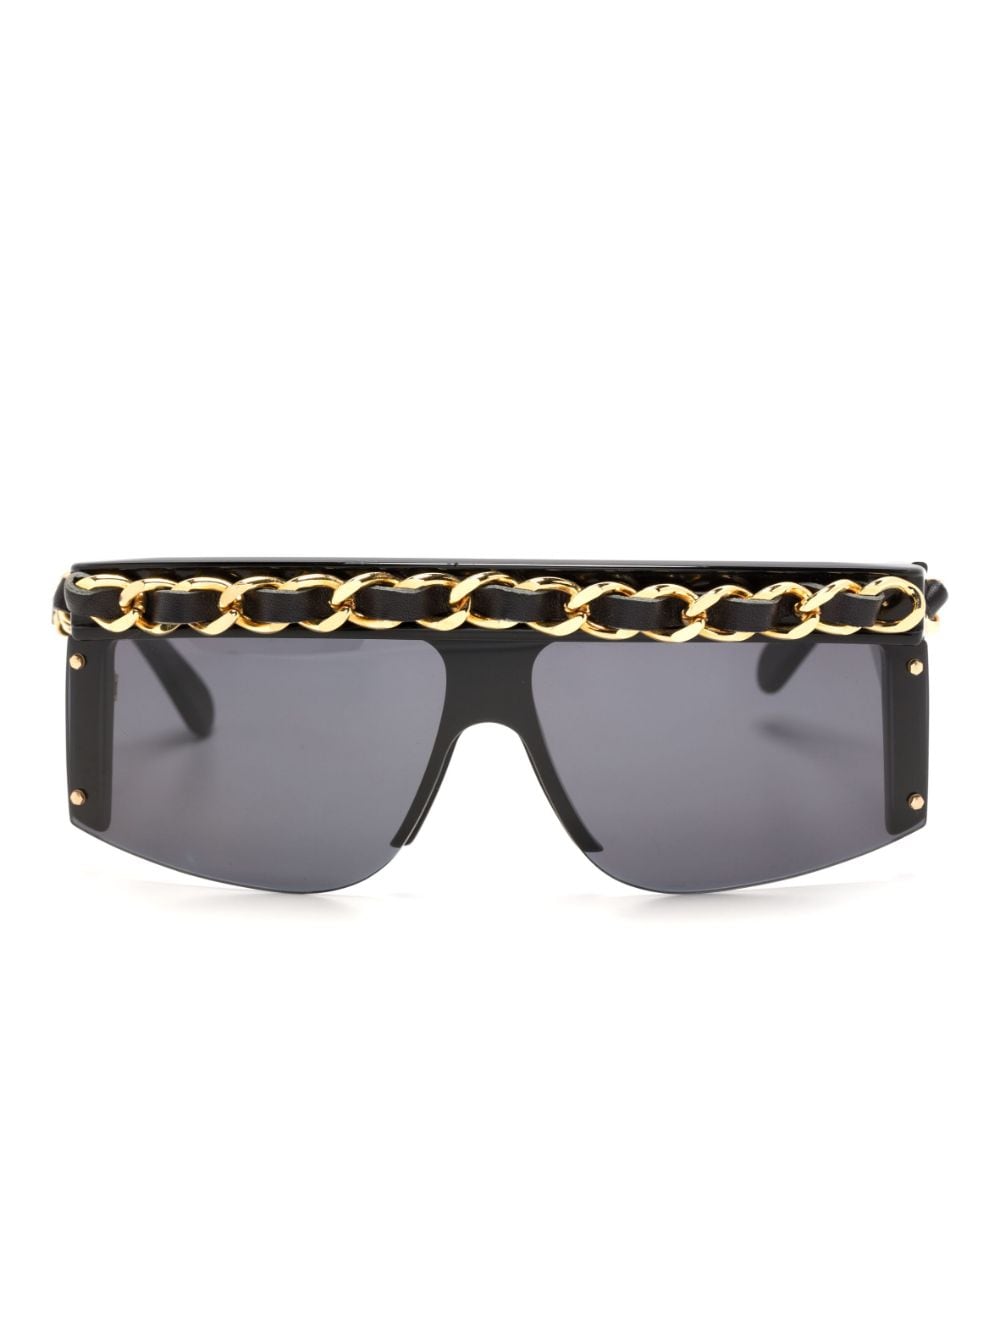 CHANEL Pre-Owned 1990-2000 leather-and-chain trimmed shield sunglasses - Black